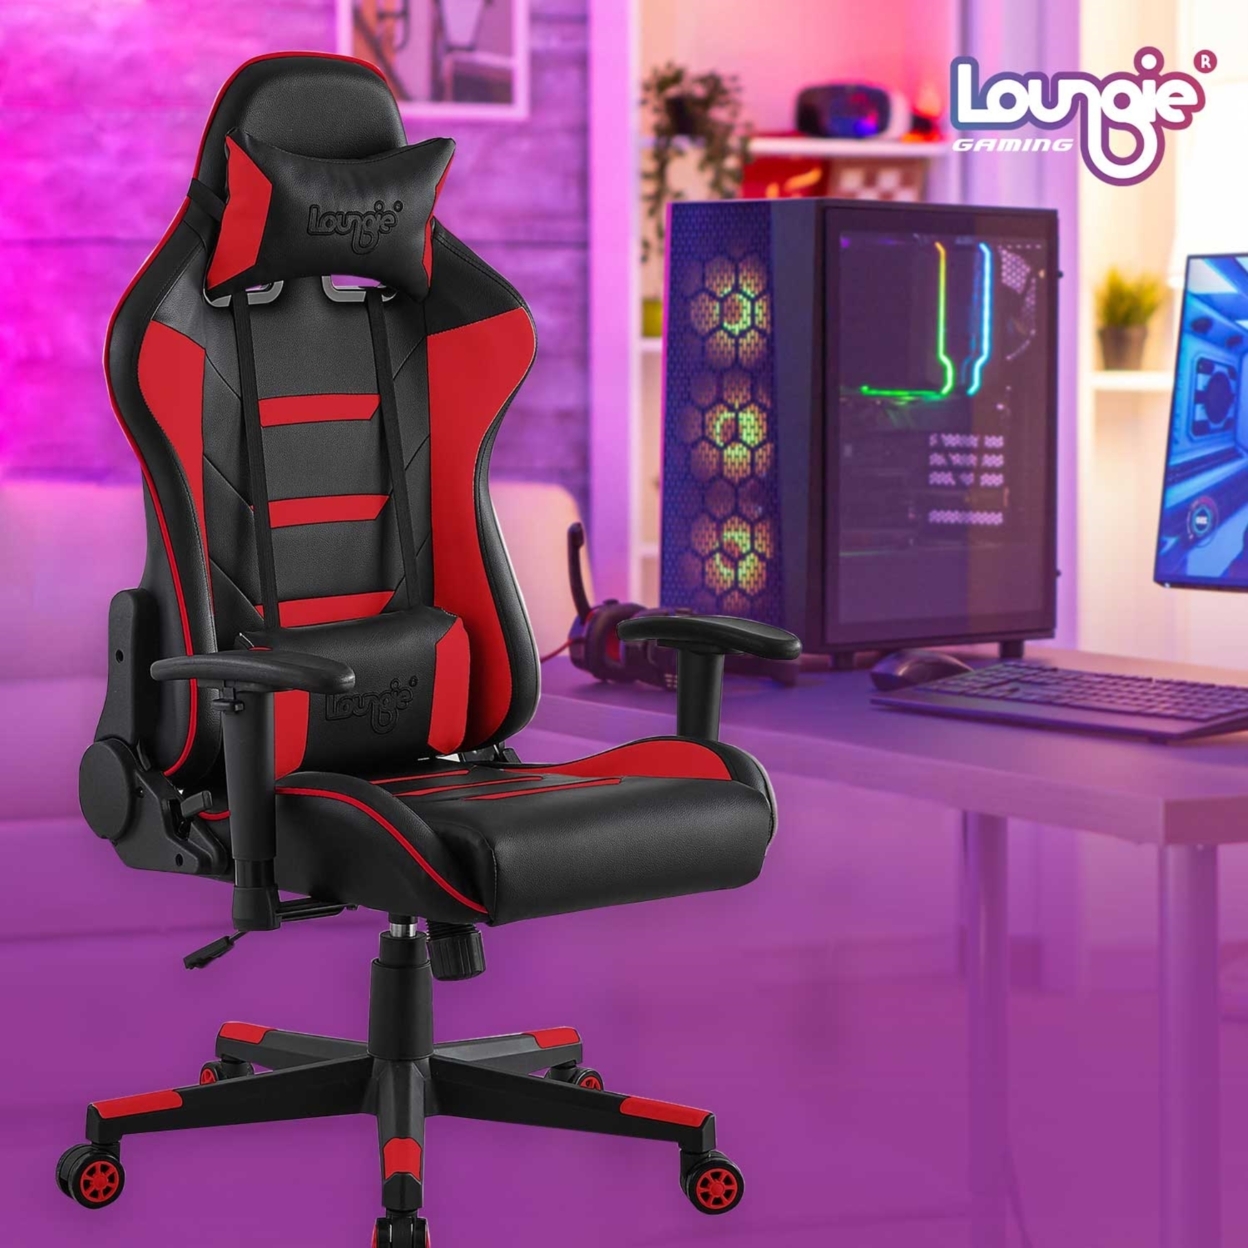 Brad Game Chair-Swivel, Adjustable Back Angle, Seat Height and Armrest-360 Degree Rotation-Neck Support, Lumbar Support Cushion - red